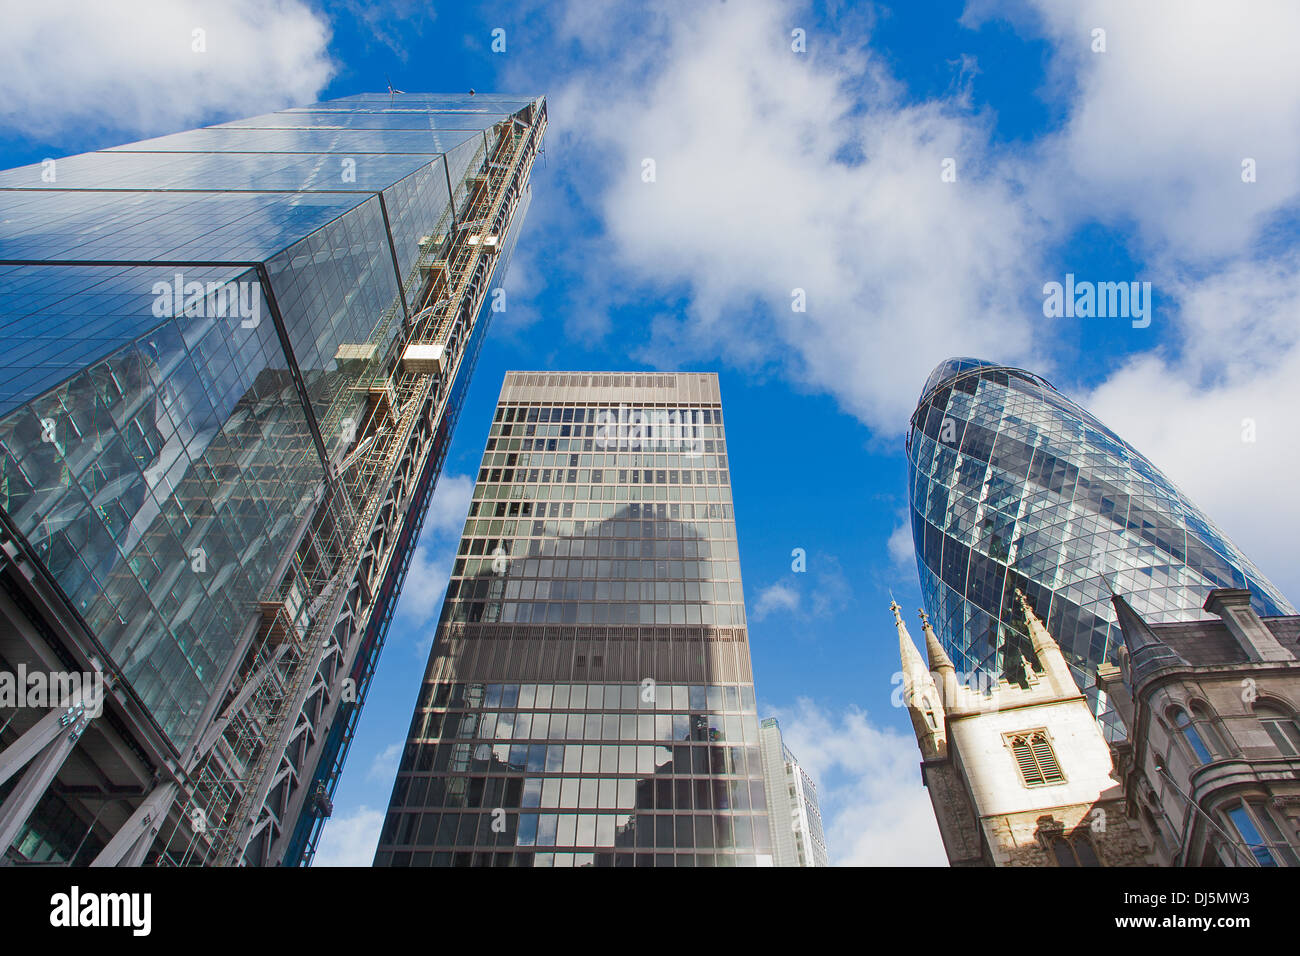 A worm's eye view of the City of London skyline, with the Leadenhall Building, (the Cheese Grater) and the Gherkin prominent Stock Photo